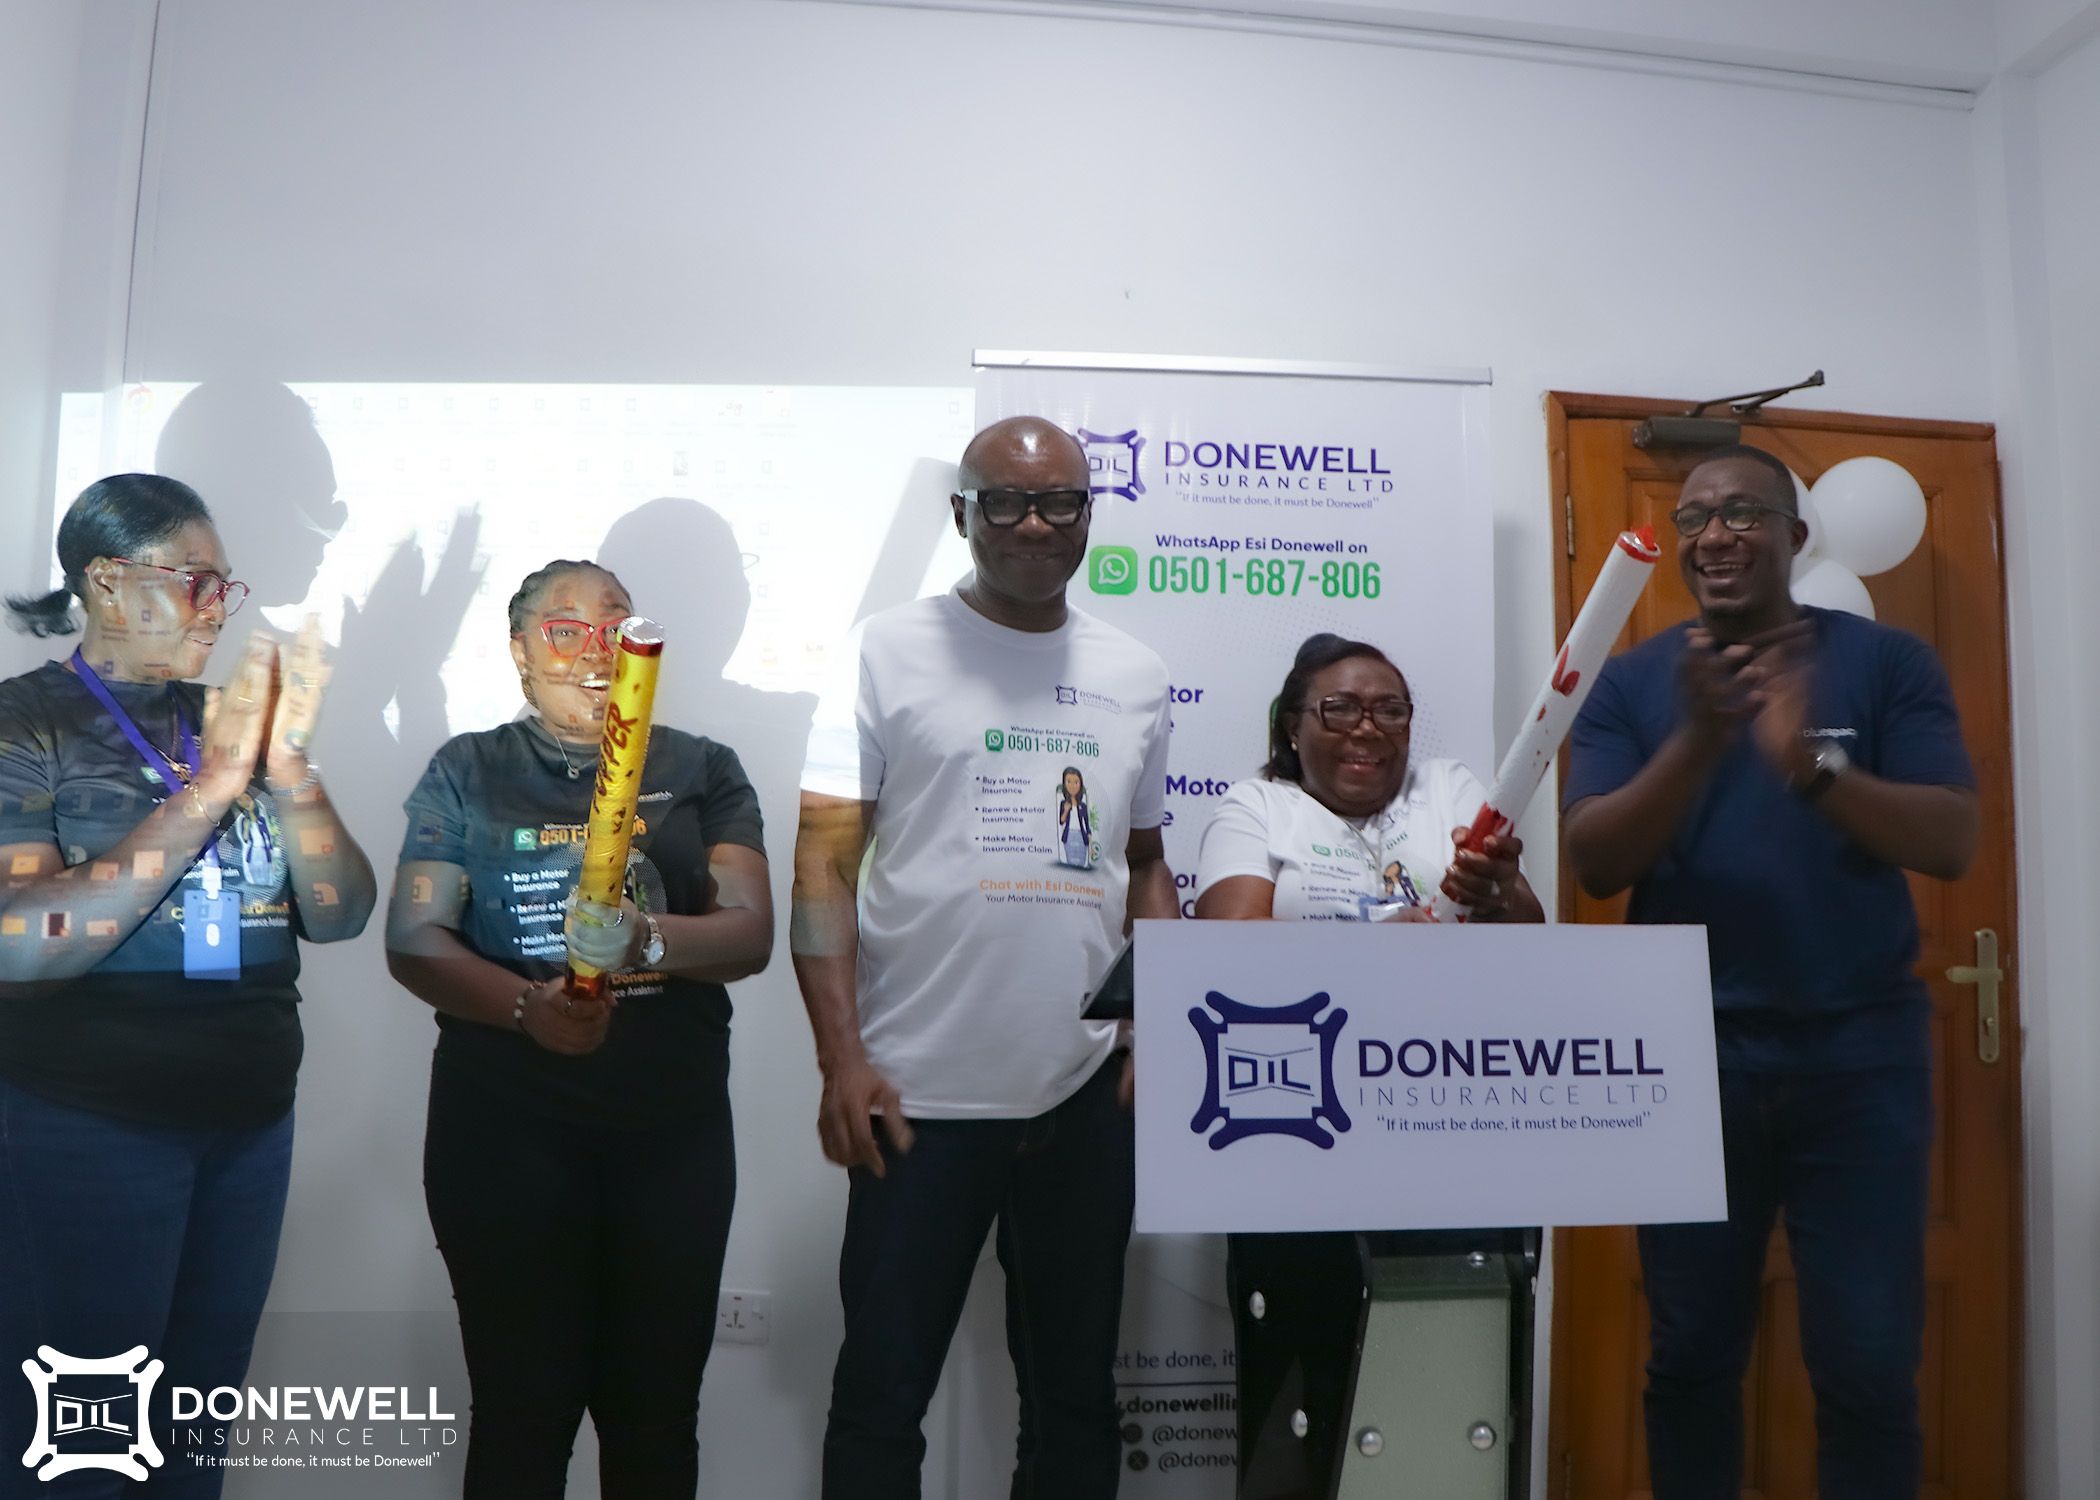 LAUNCH OF ESI DONEWELL images